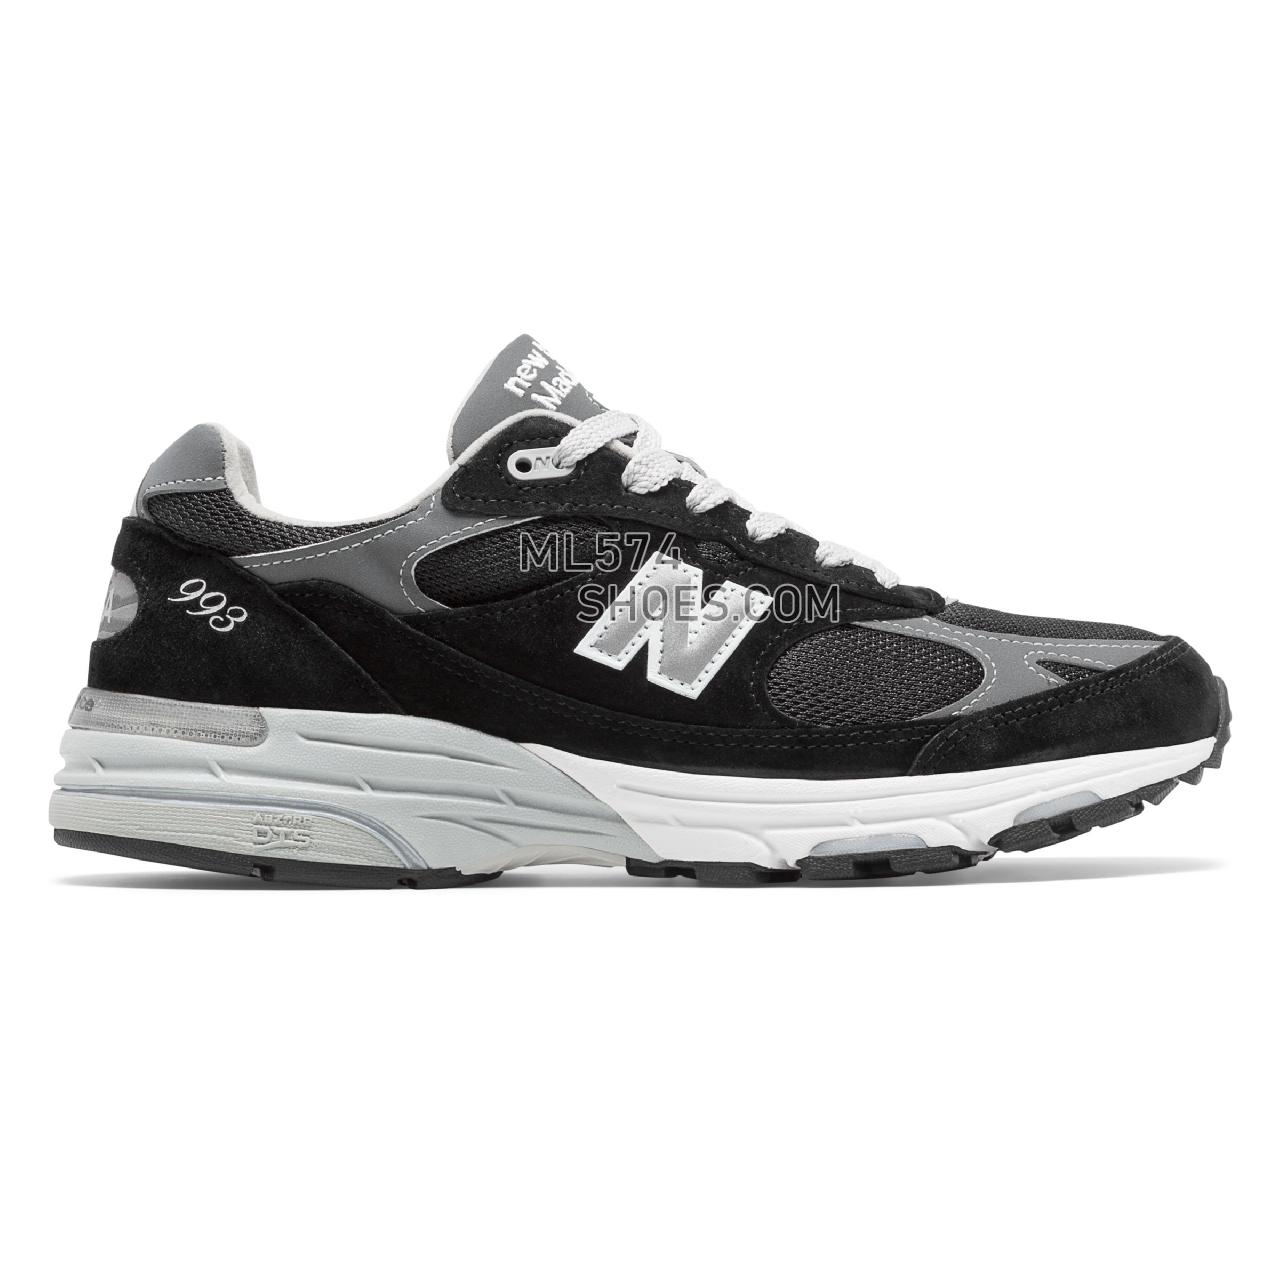 New Balance Made in US 993 - Men's Neutral Running - Black with Grey - MR993BK